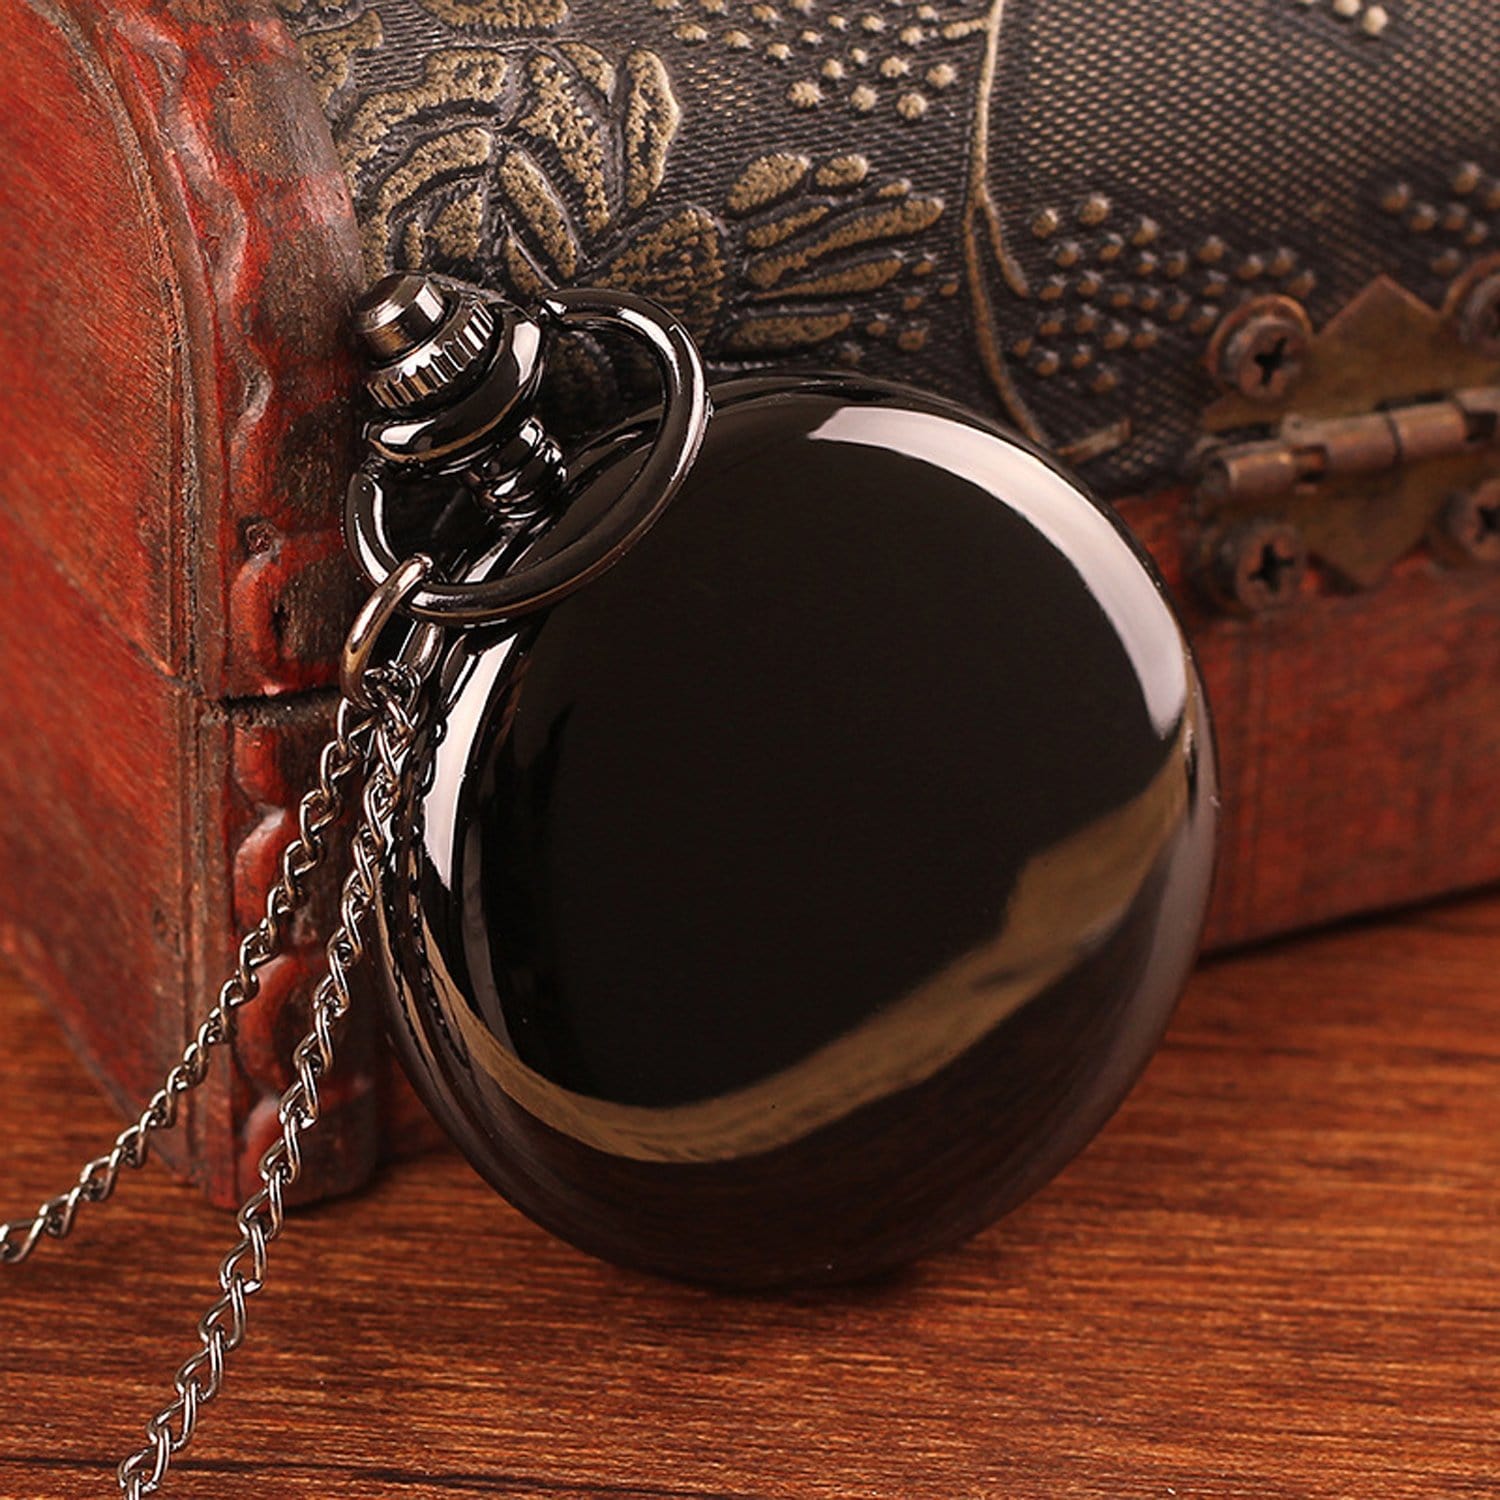 Pocket Watches To My Husband - See Yourself Through My Eyes Pocket Watch GiveMe-Gifts